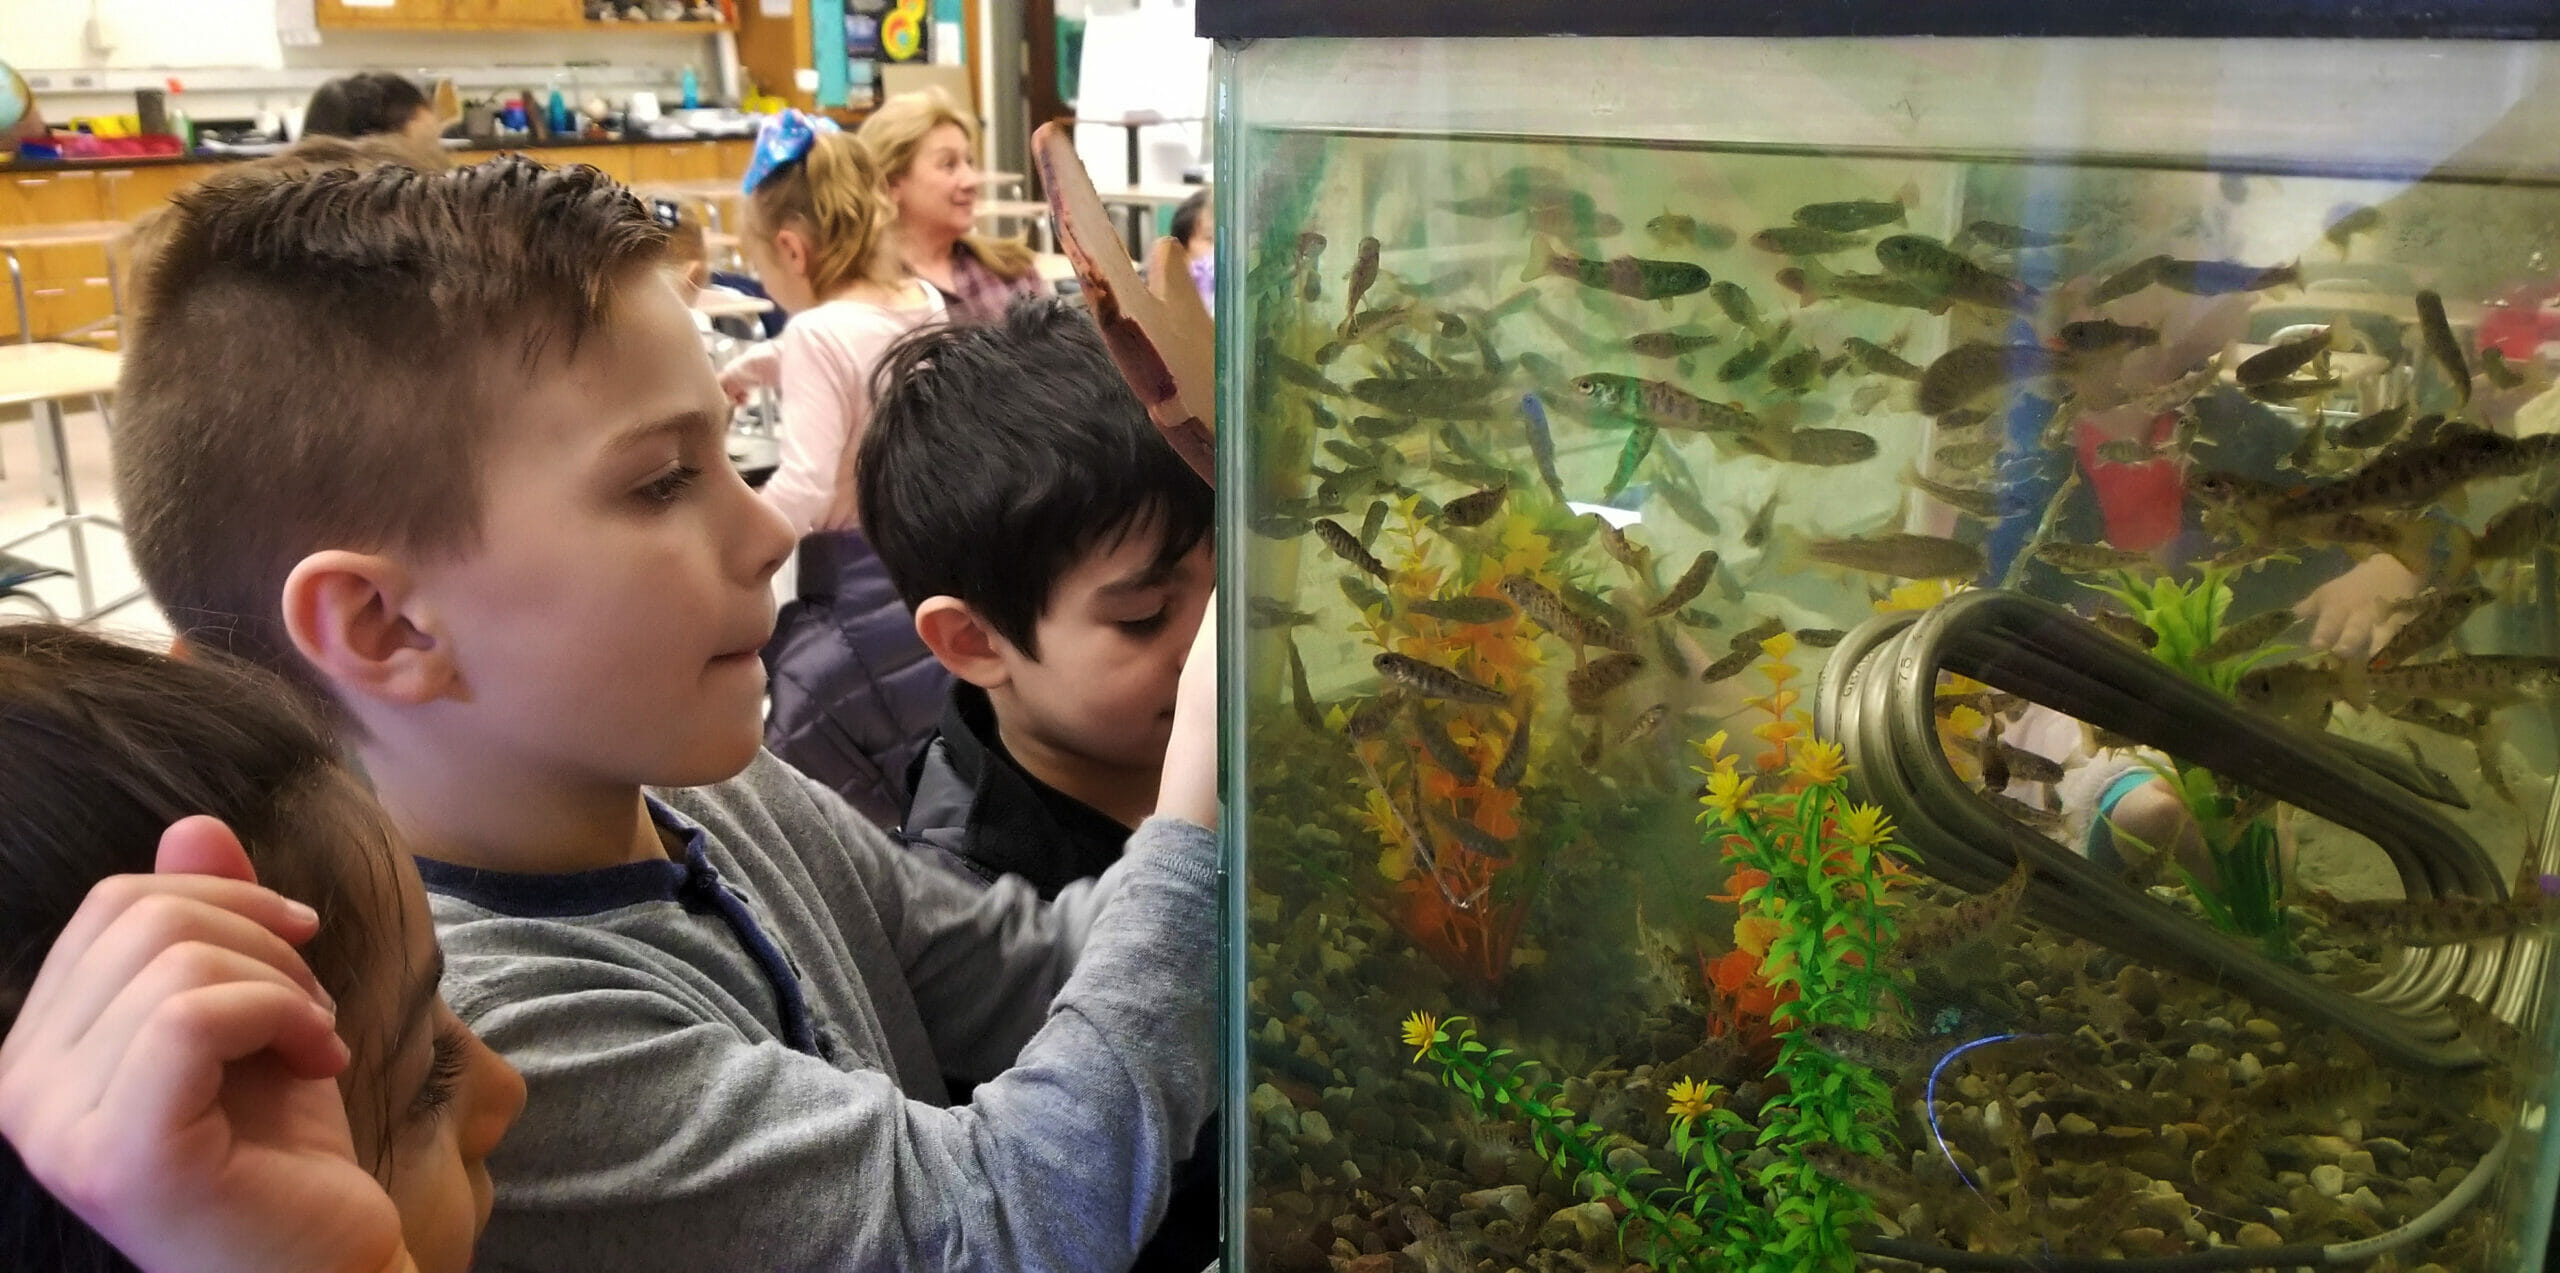 Several elementary kids look closely at a tank full of fish